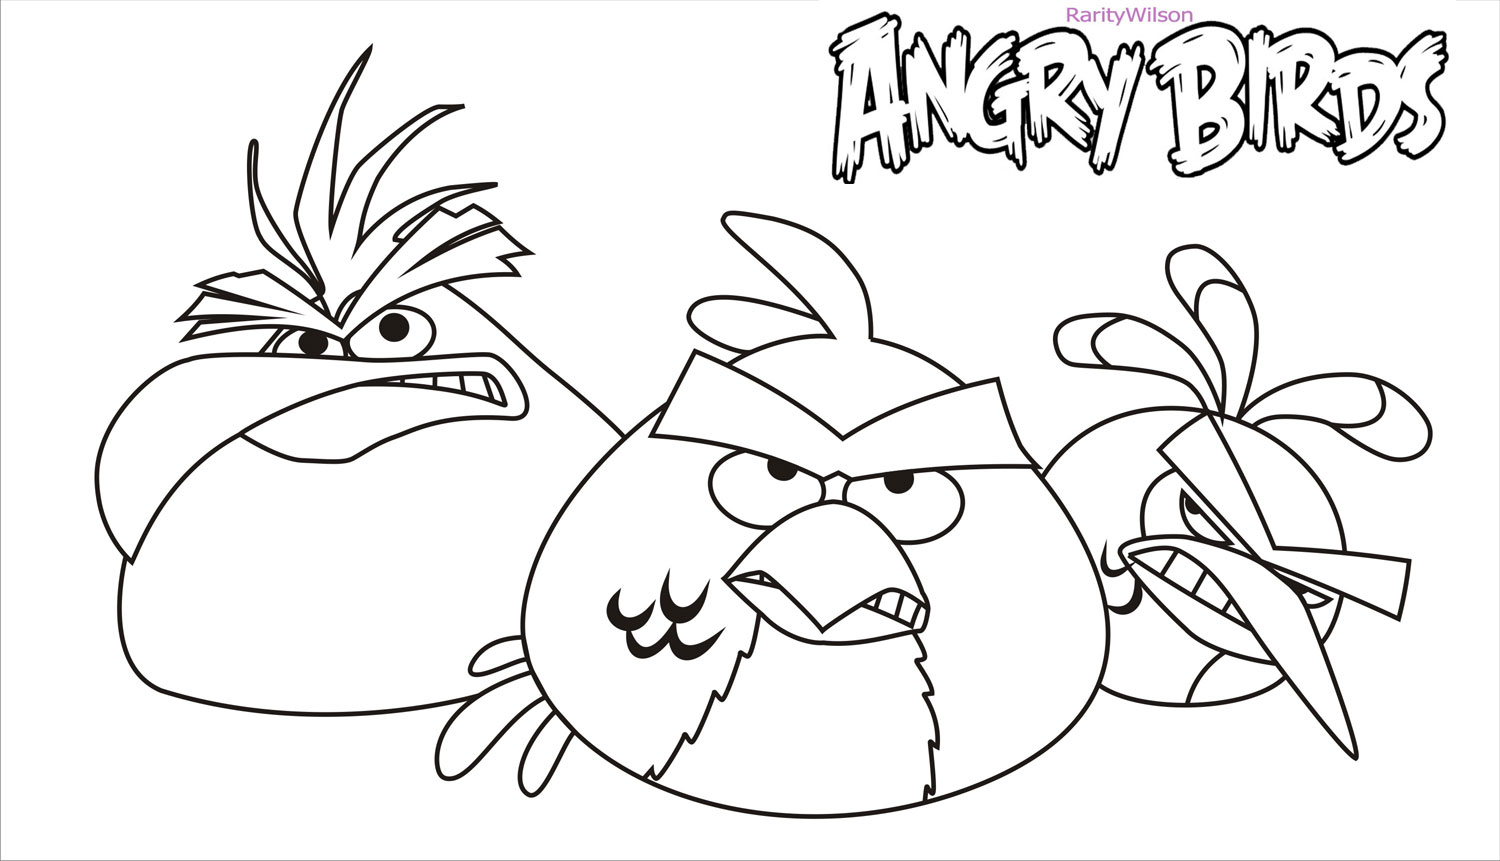  Serious Angry Birds Coloring pages